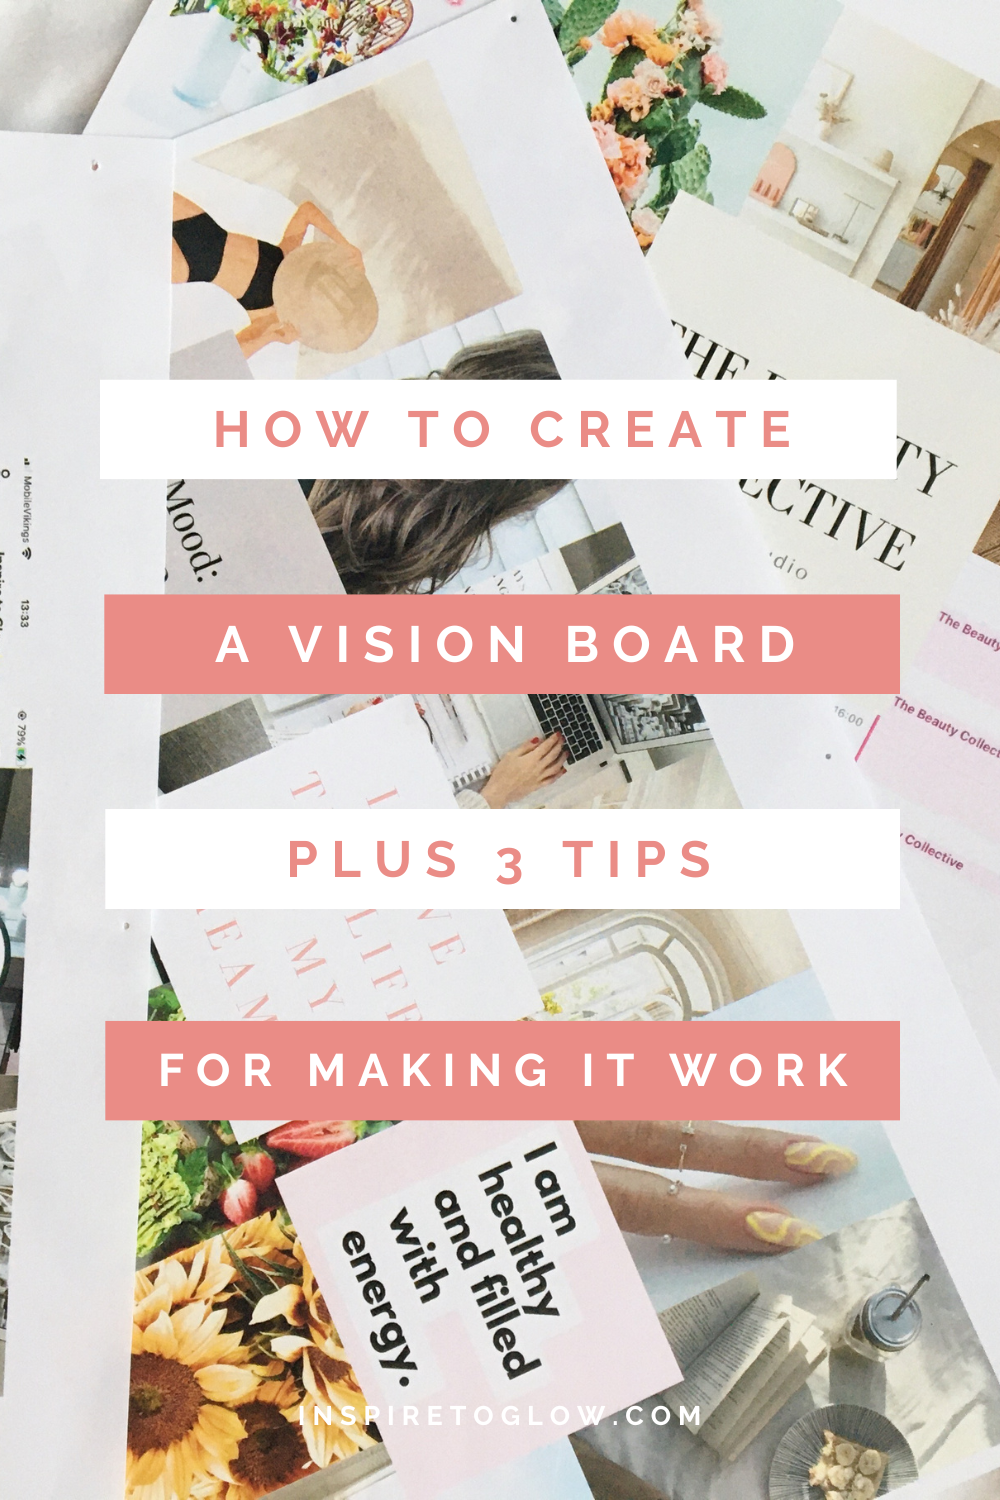 How to create a Vision Board that works - Inspire to Glow